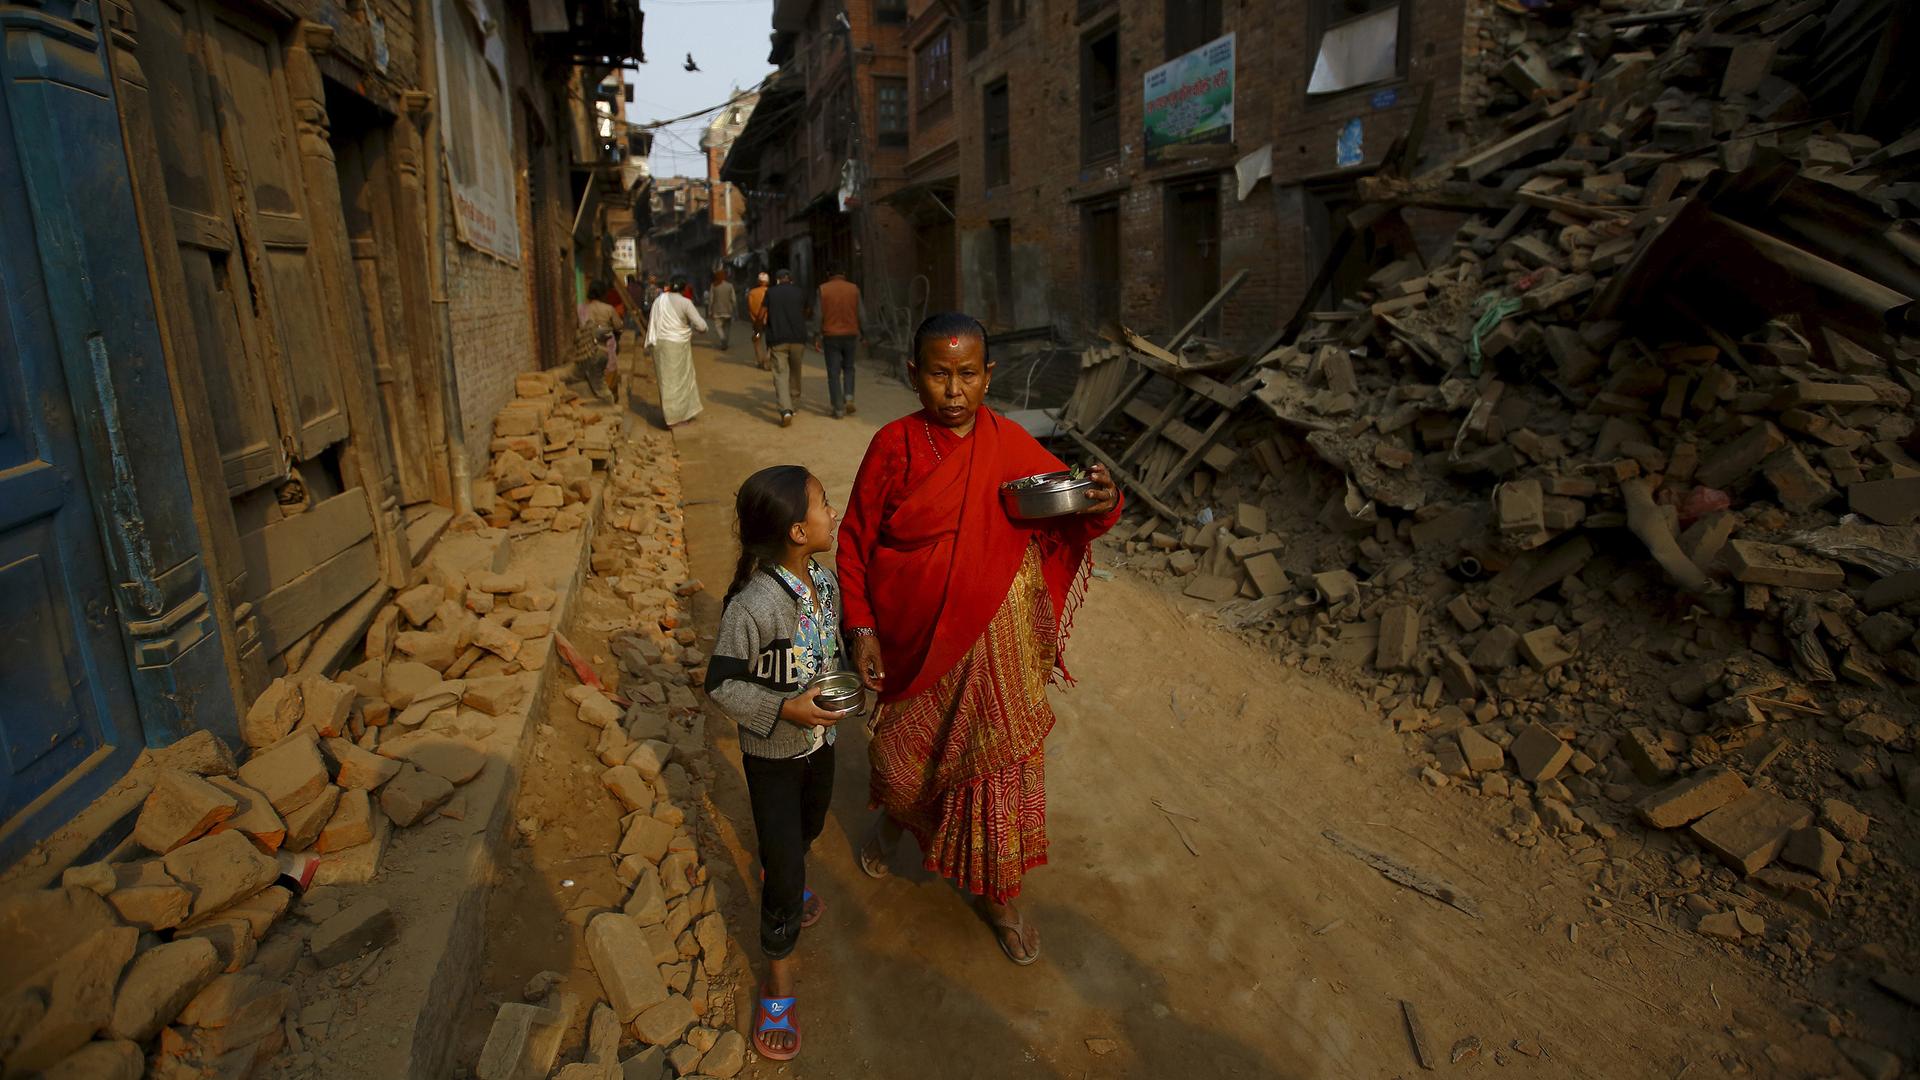 A woman and a child, returning from a temple, walk past damaged and collapsed houses following the April 25, 2015, earthquake in Nepal.